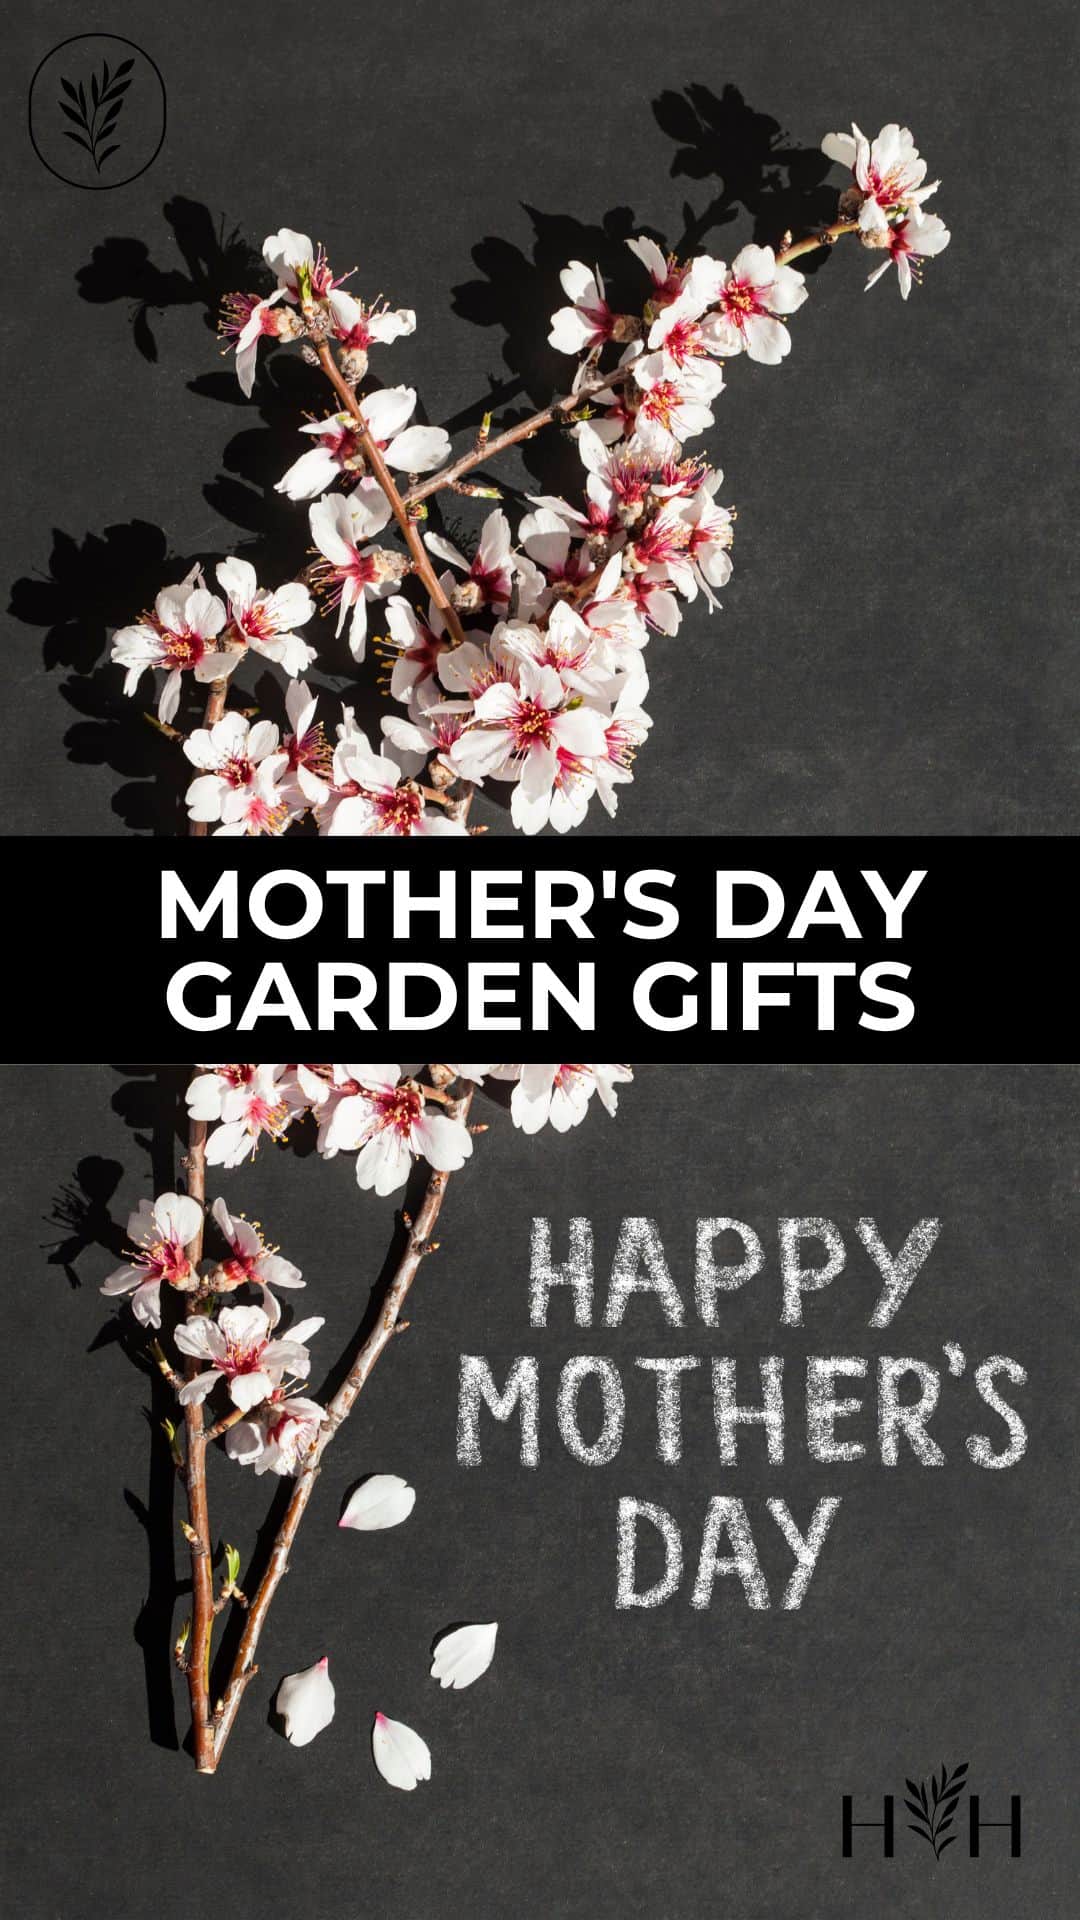 Mother's day garden gifts via @home4theharvest